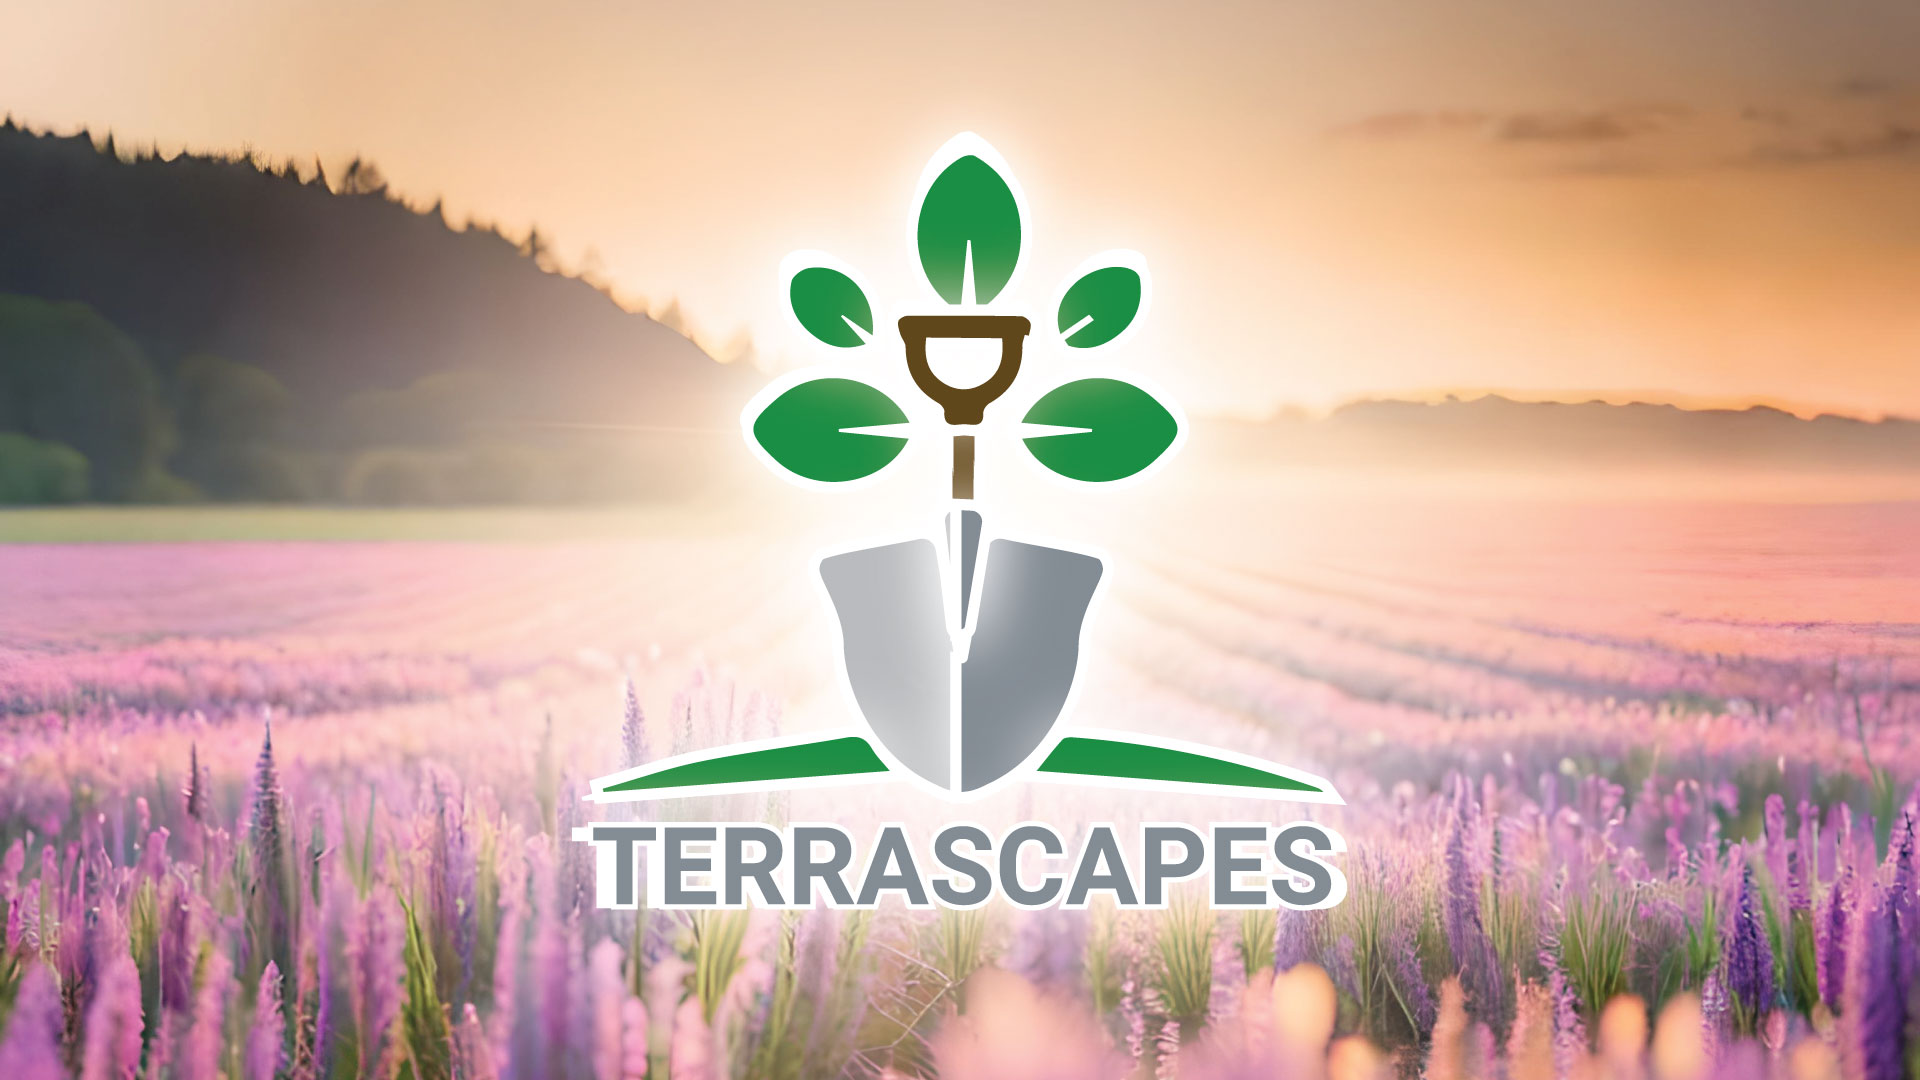 Lawn Care and Landscaping Logos